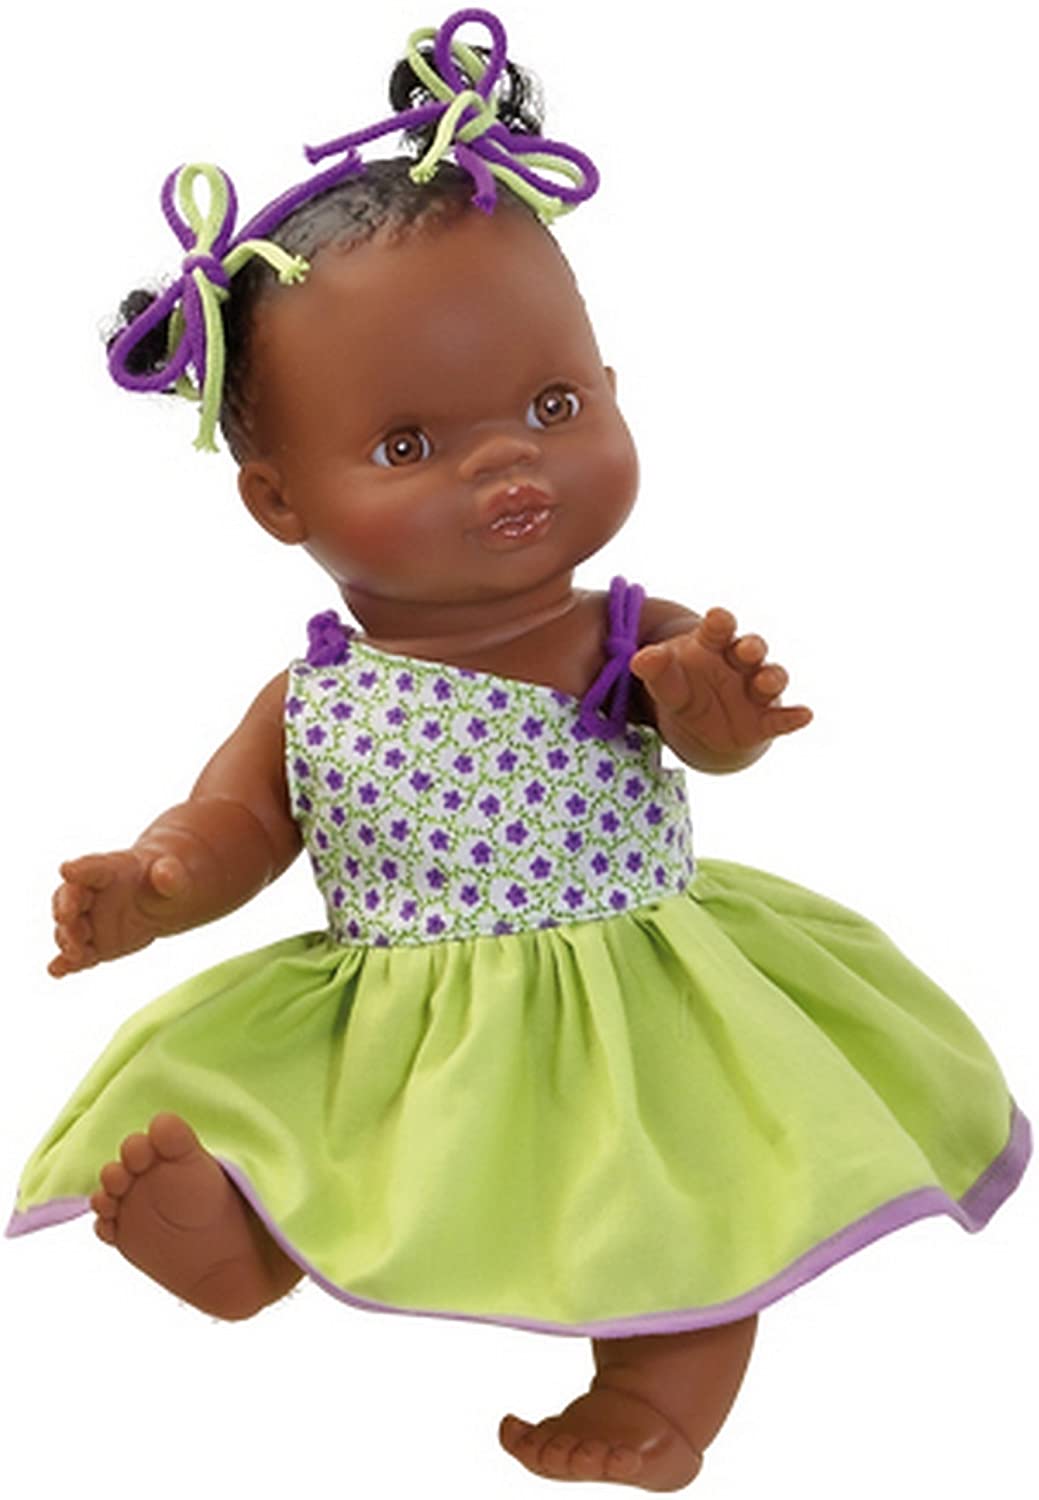 'Paola Reina 01167 21 cm "the Children of the City of Lucas Doll, 34 cm